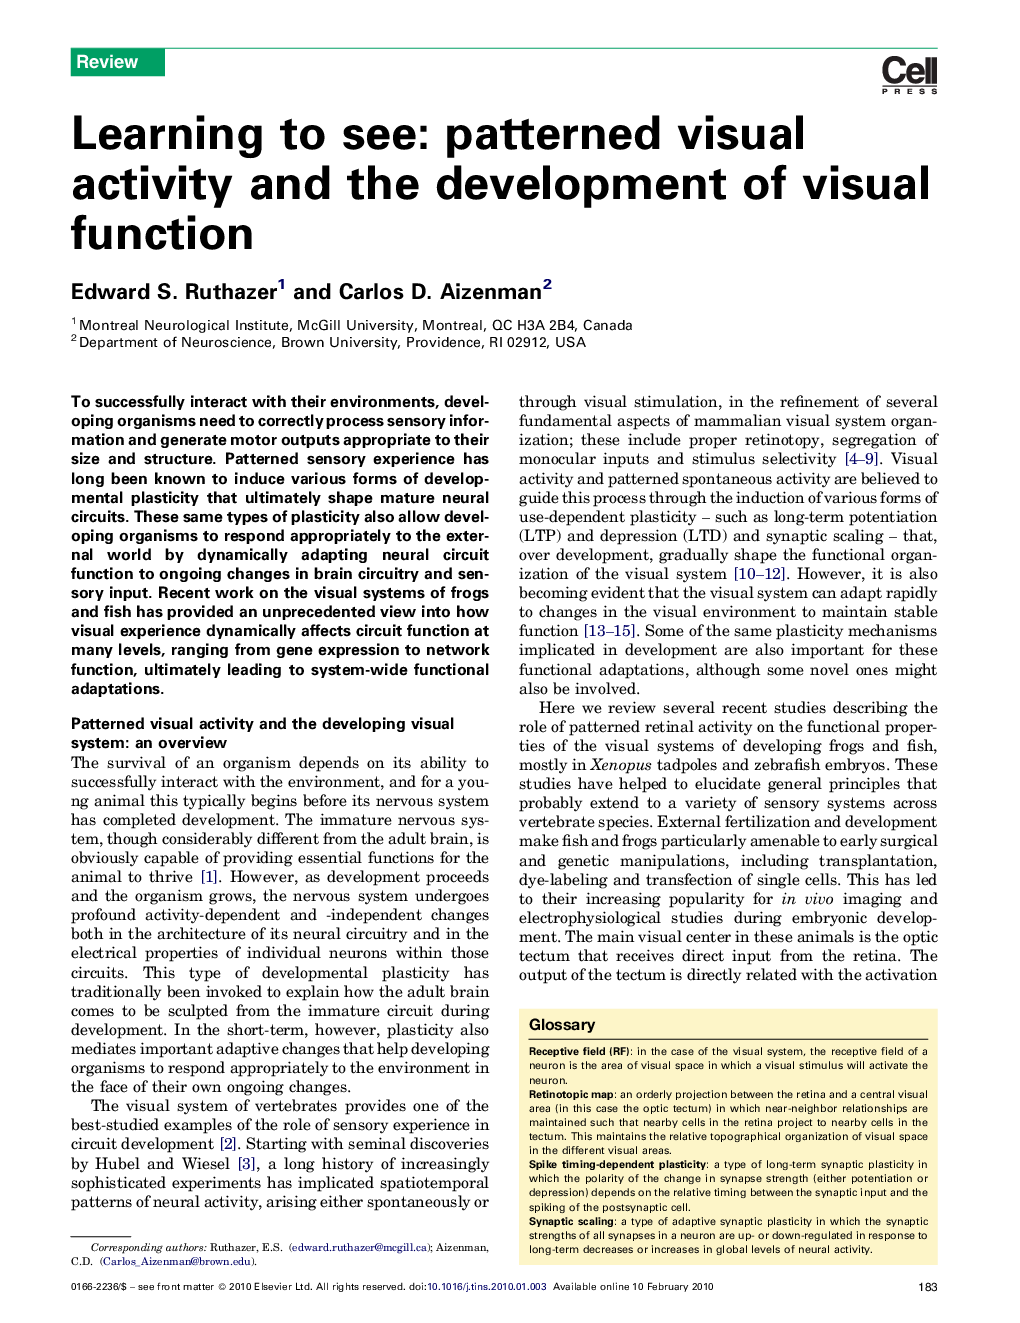 Learning to see: patterned visual activity and the development of visual function